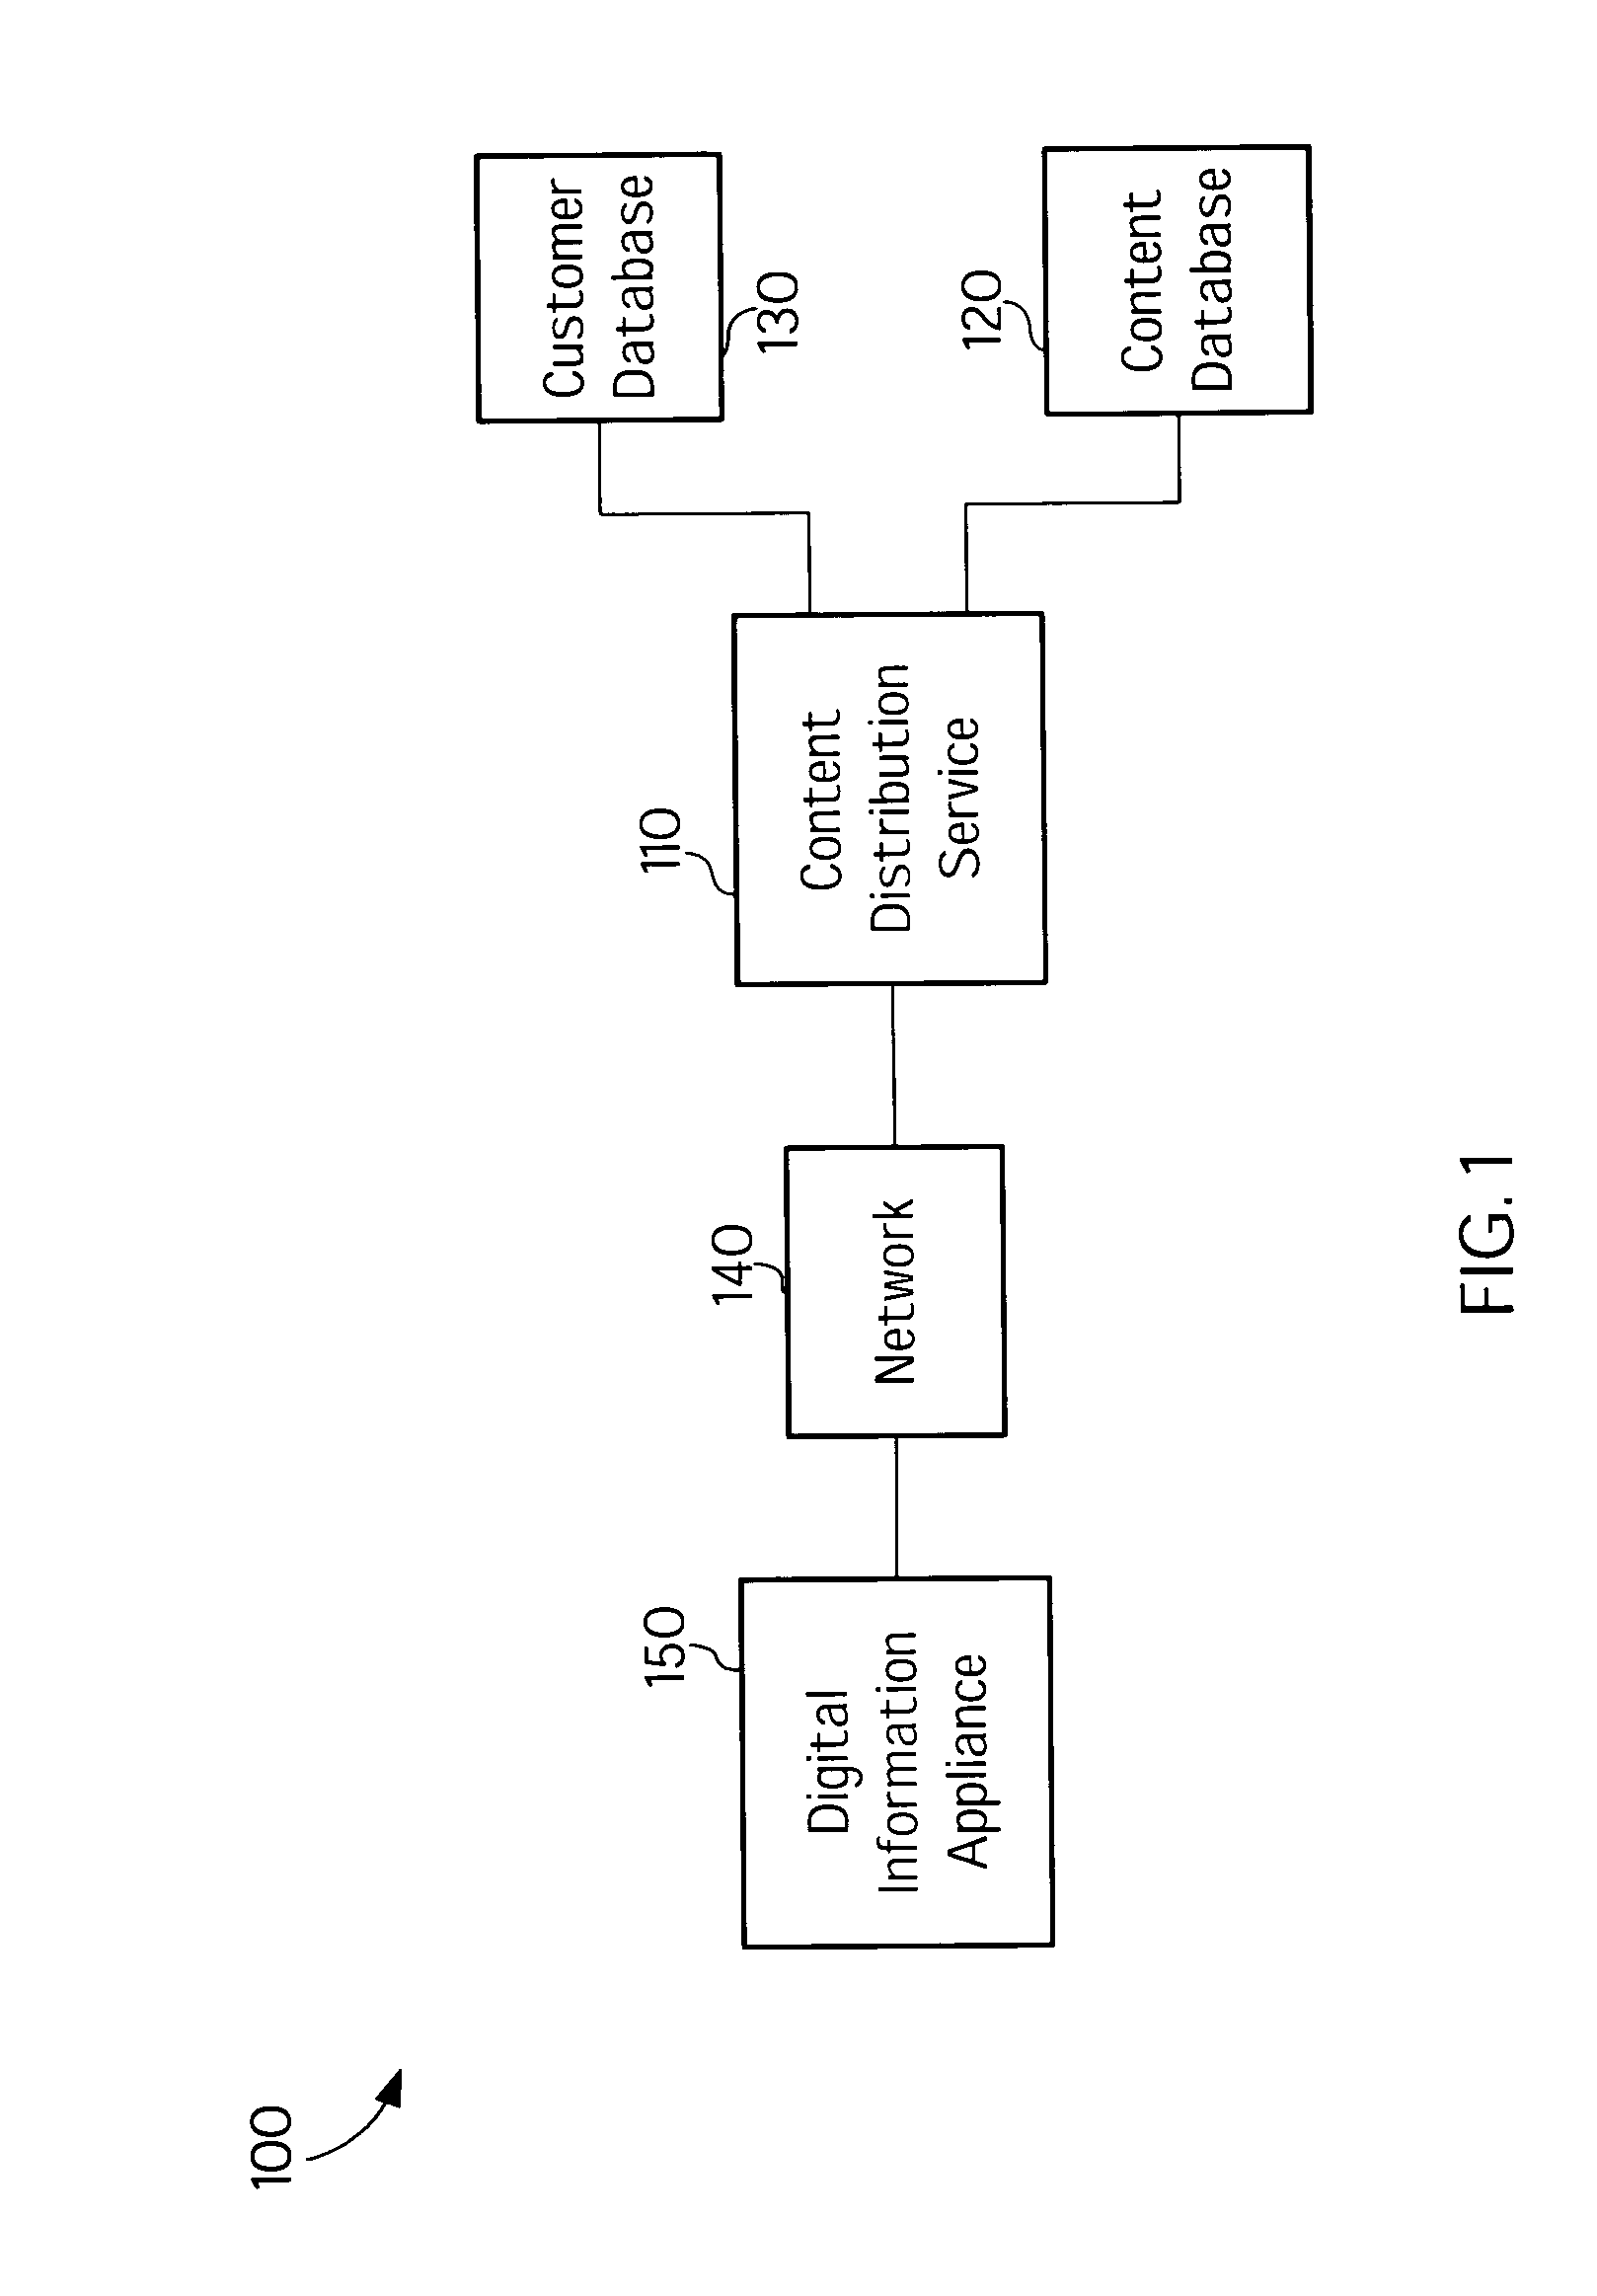 Web-based music distribution system and method therefor